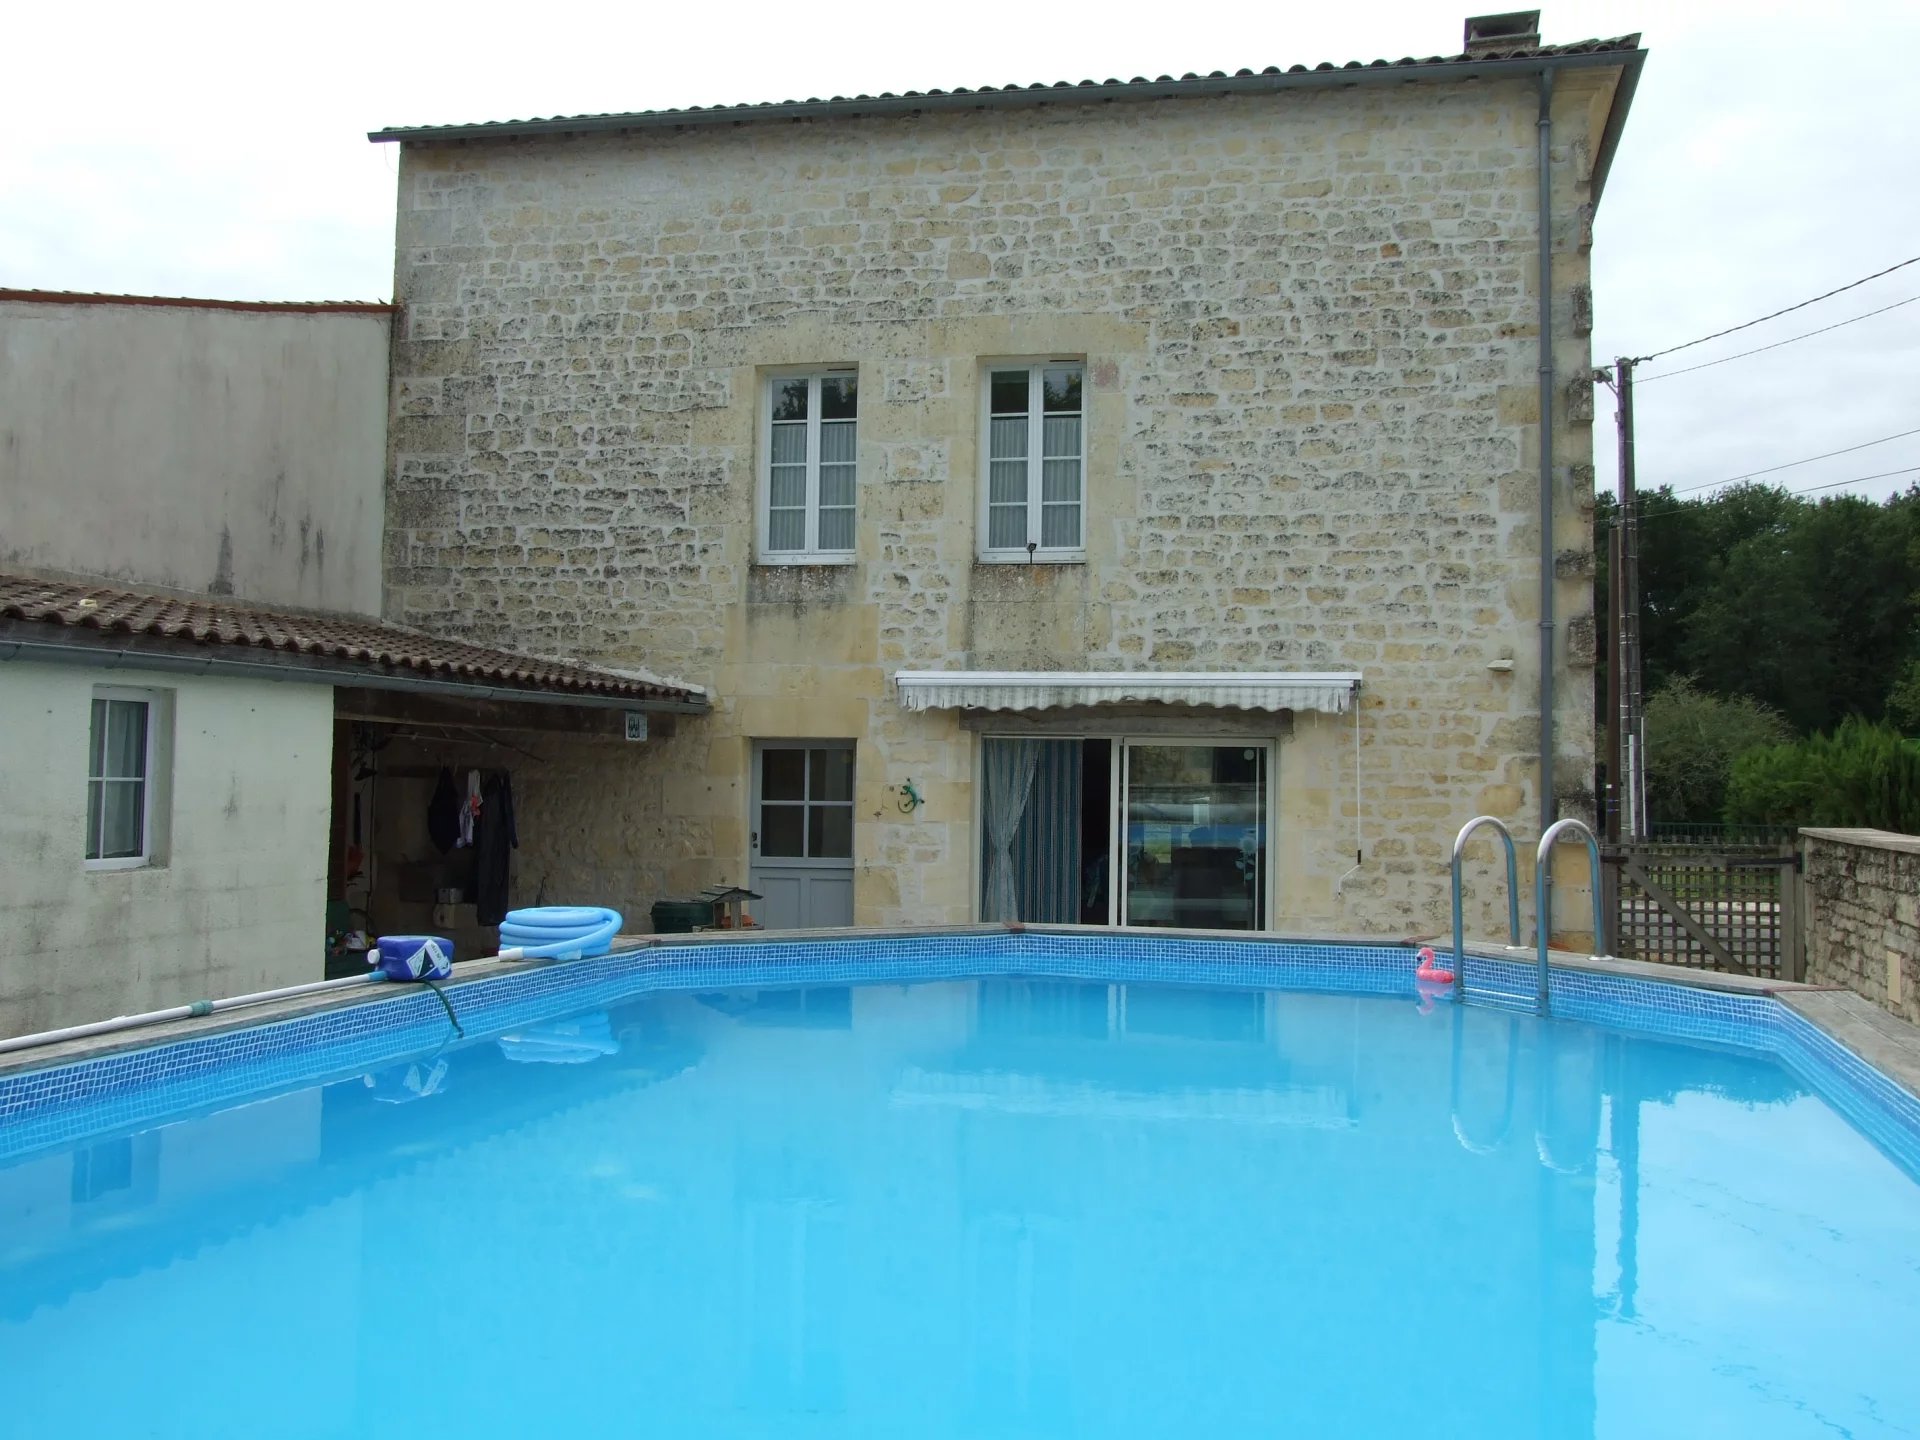 4 Bed Property close to Jonzac with Pool